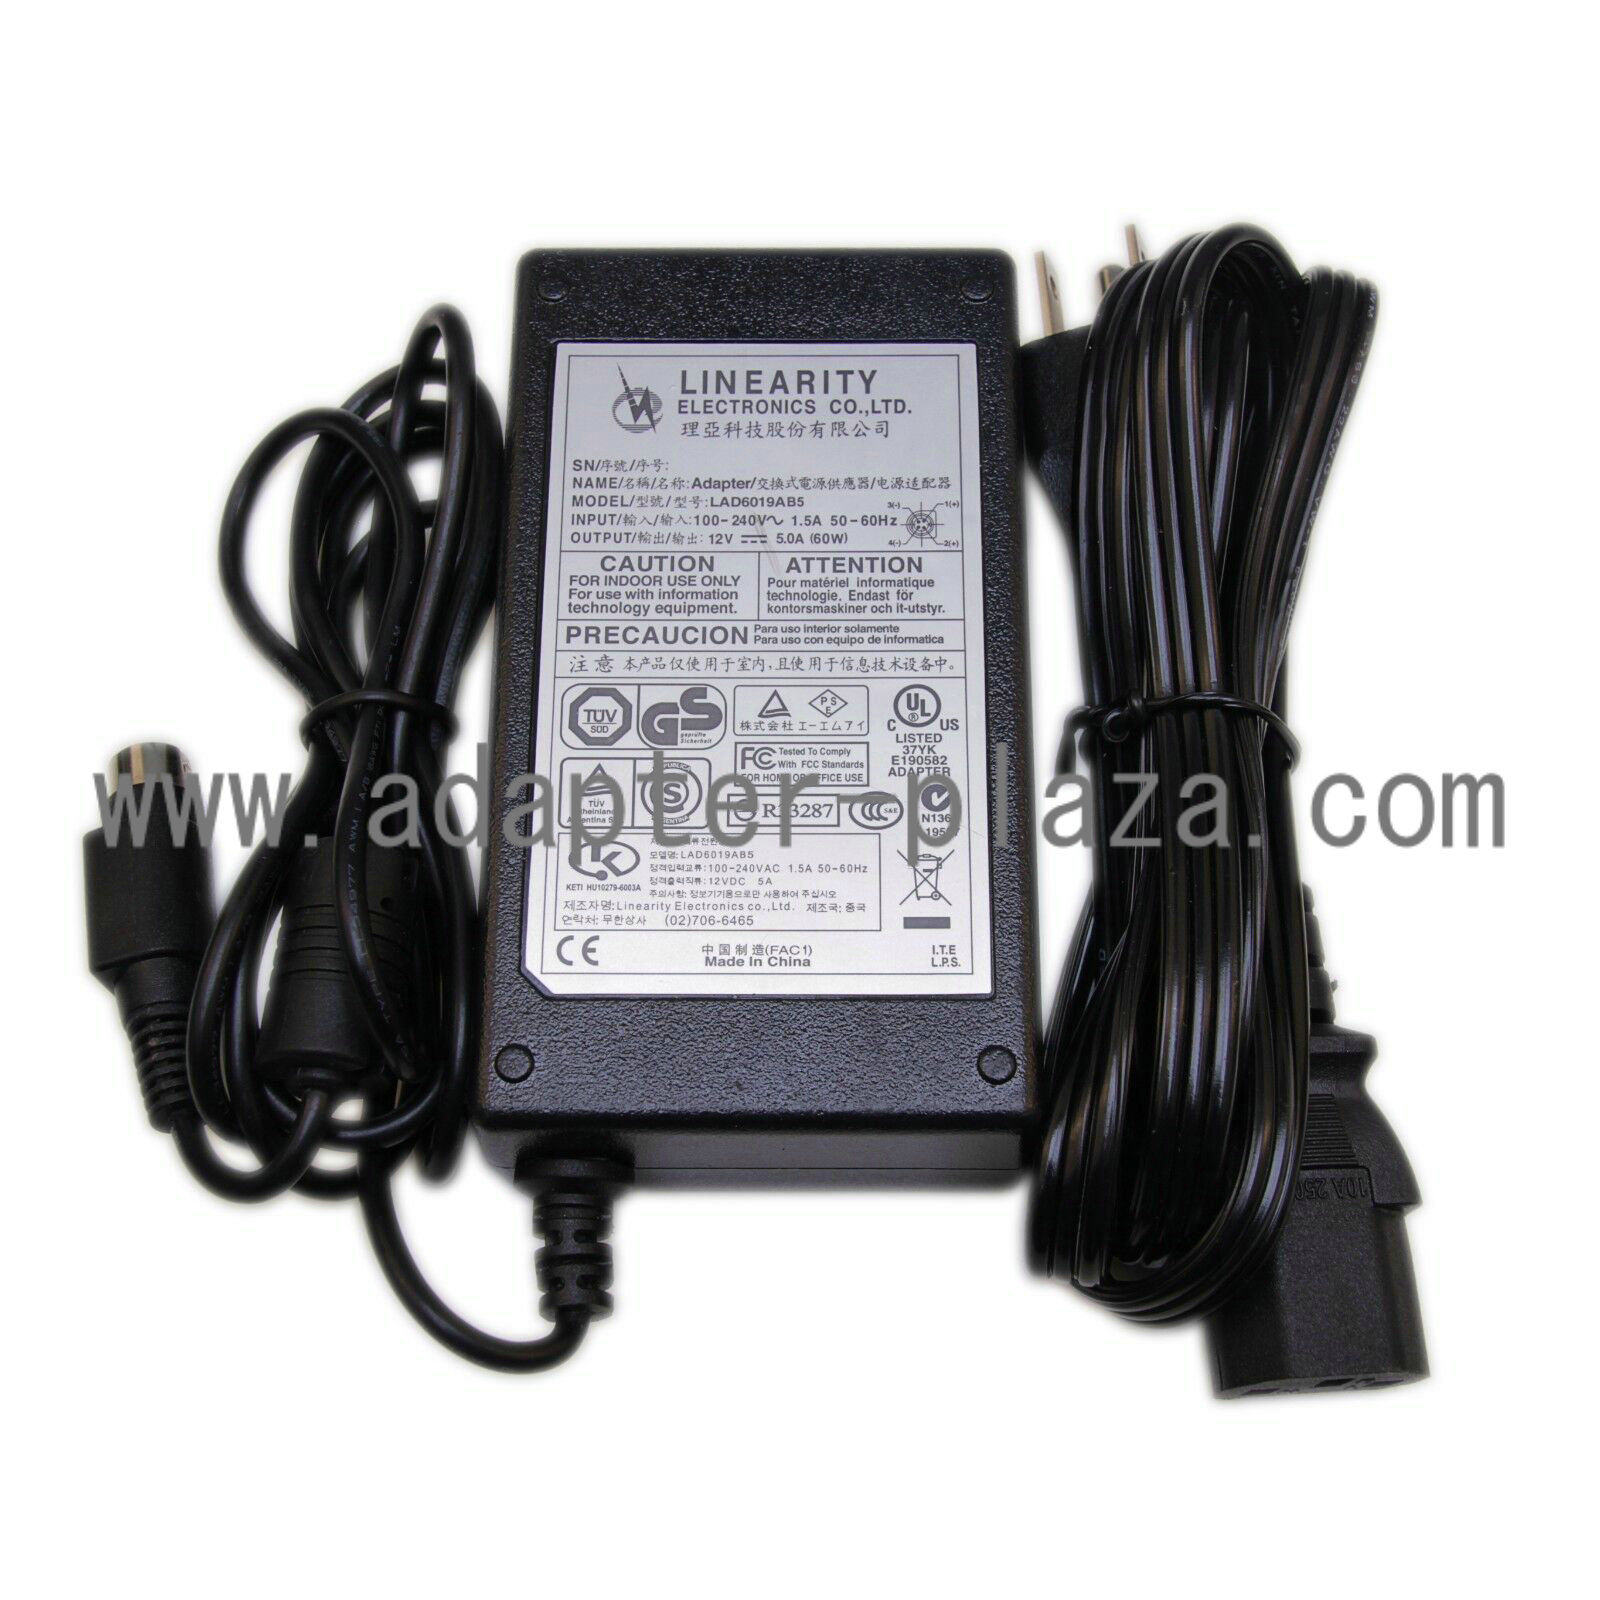 NEW LINEARITY 12V 5.0A 60W LAD6019AB5 AC/DC Adapter Power Supply Charger 4-pin